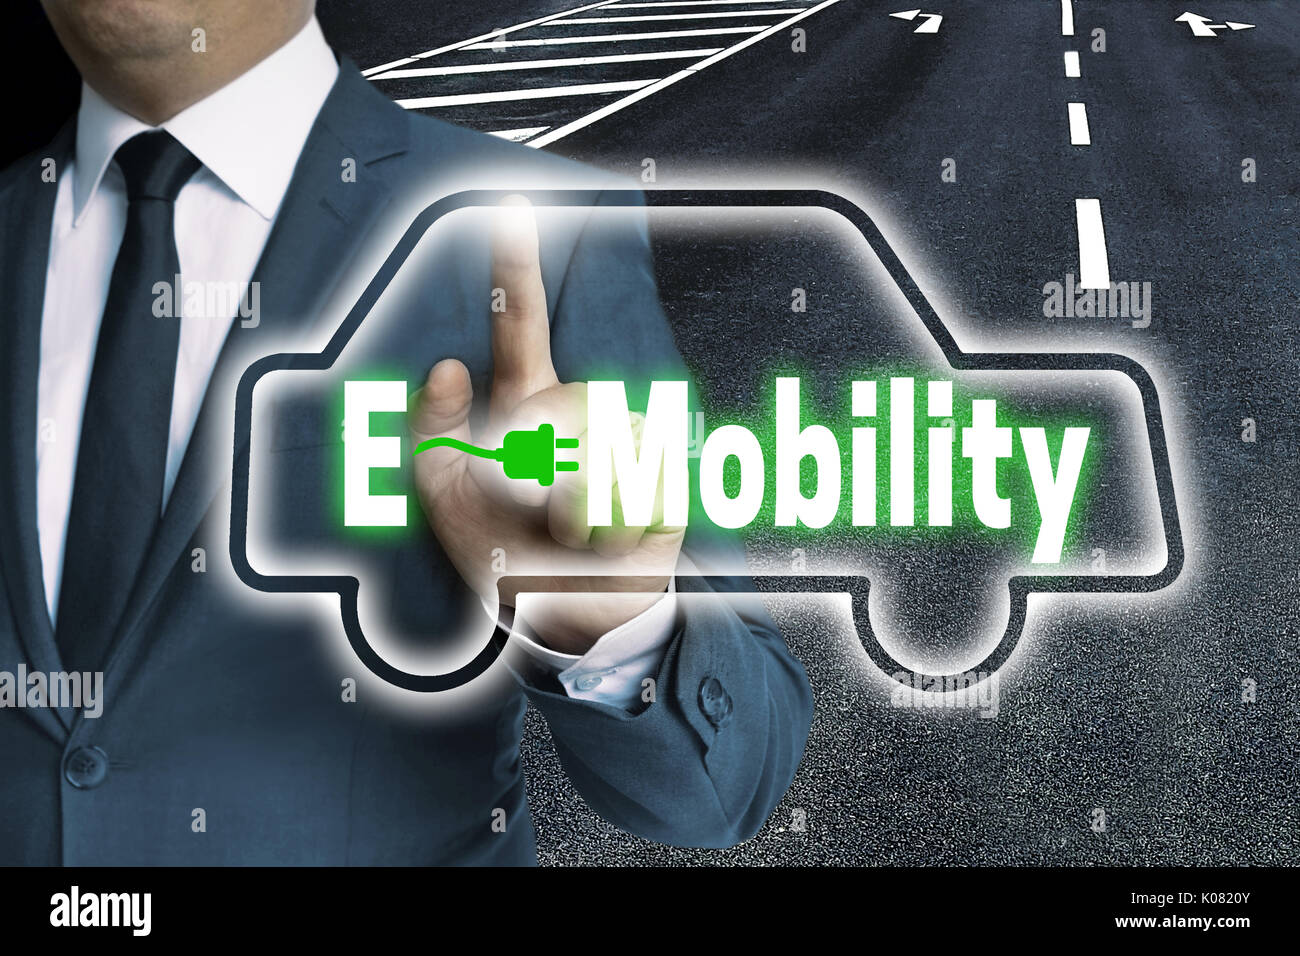 E-Mobility touchscreen is operated by man concept. Stock Photo